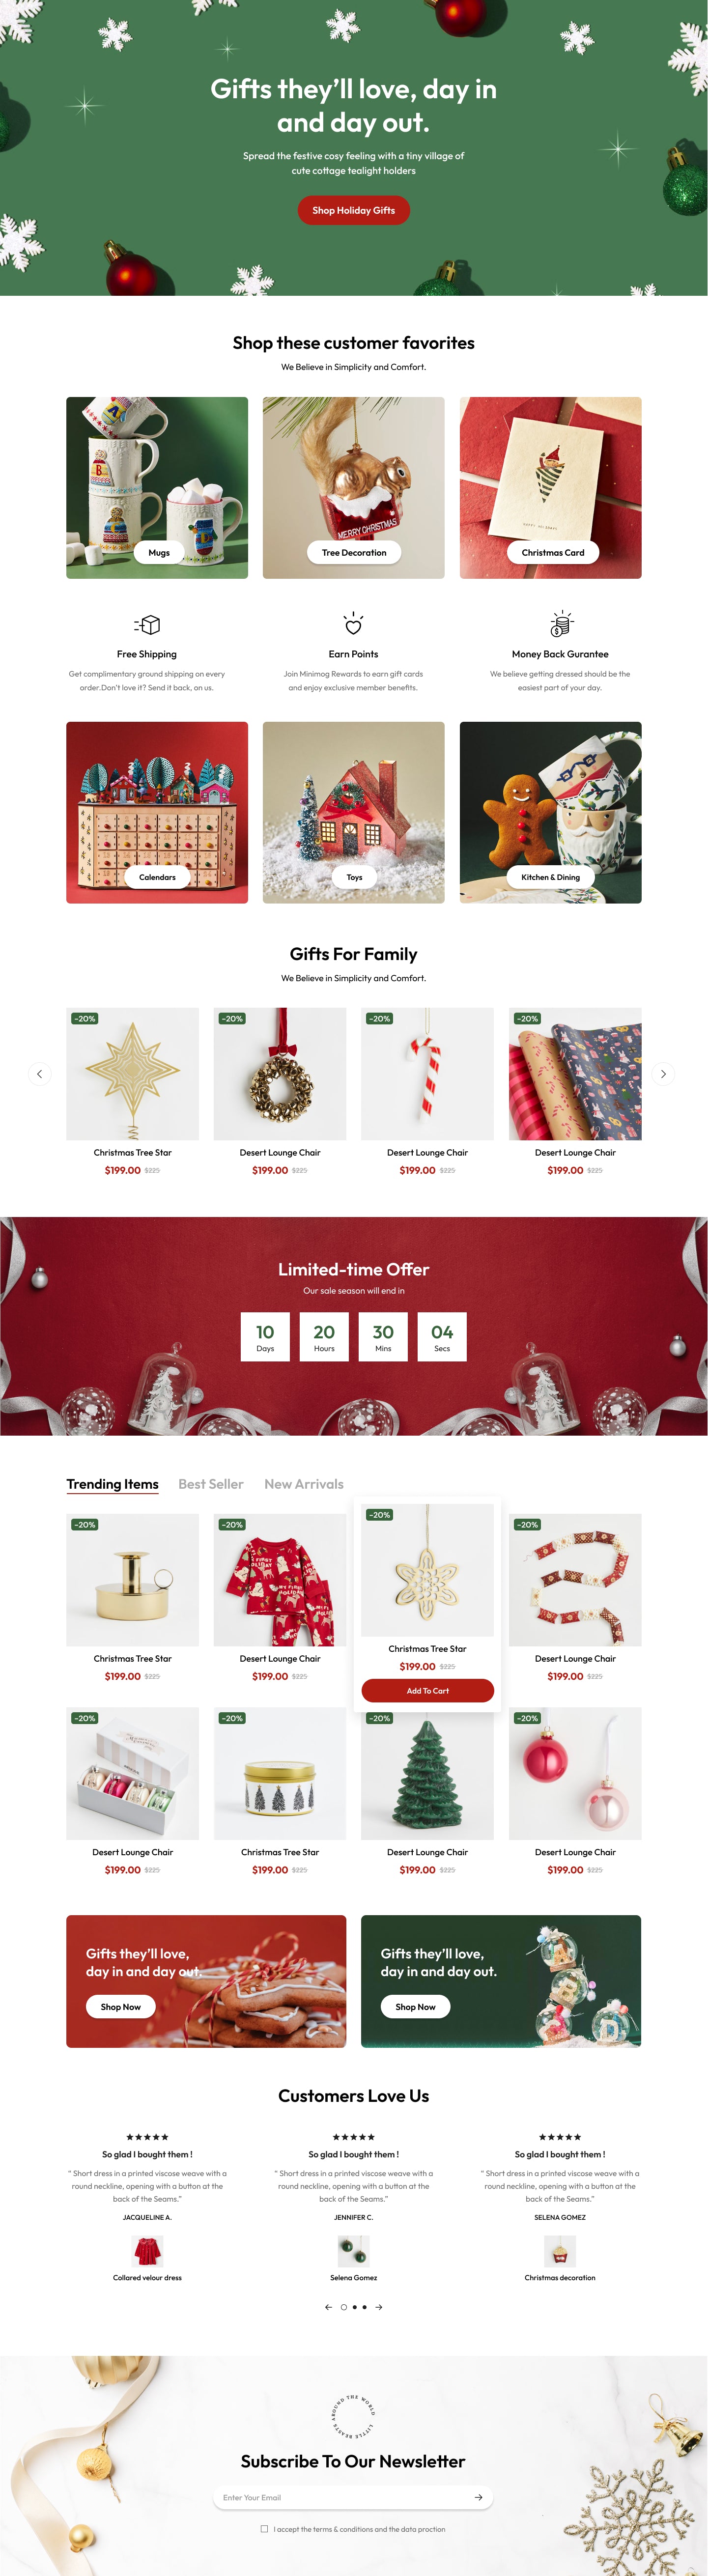 Holiday website design template for gifts theme